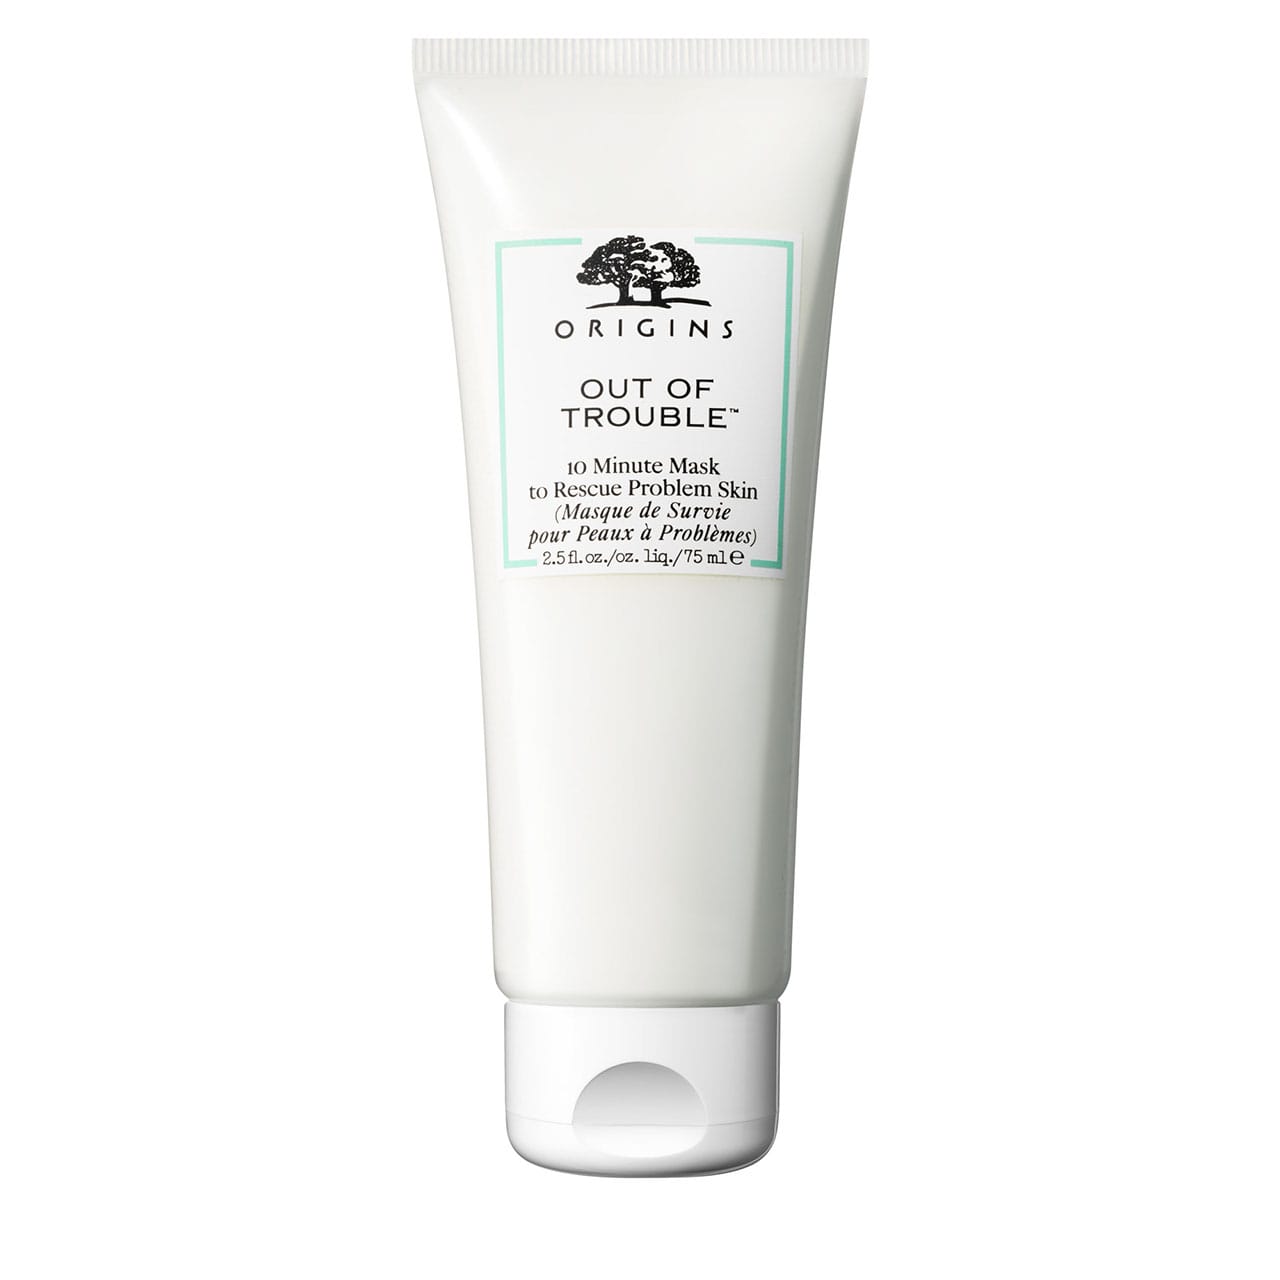 Out of Trouble™ 10 Minute Mask To Rescue Problem Skin 75ml